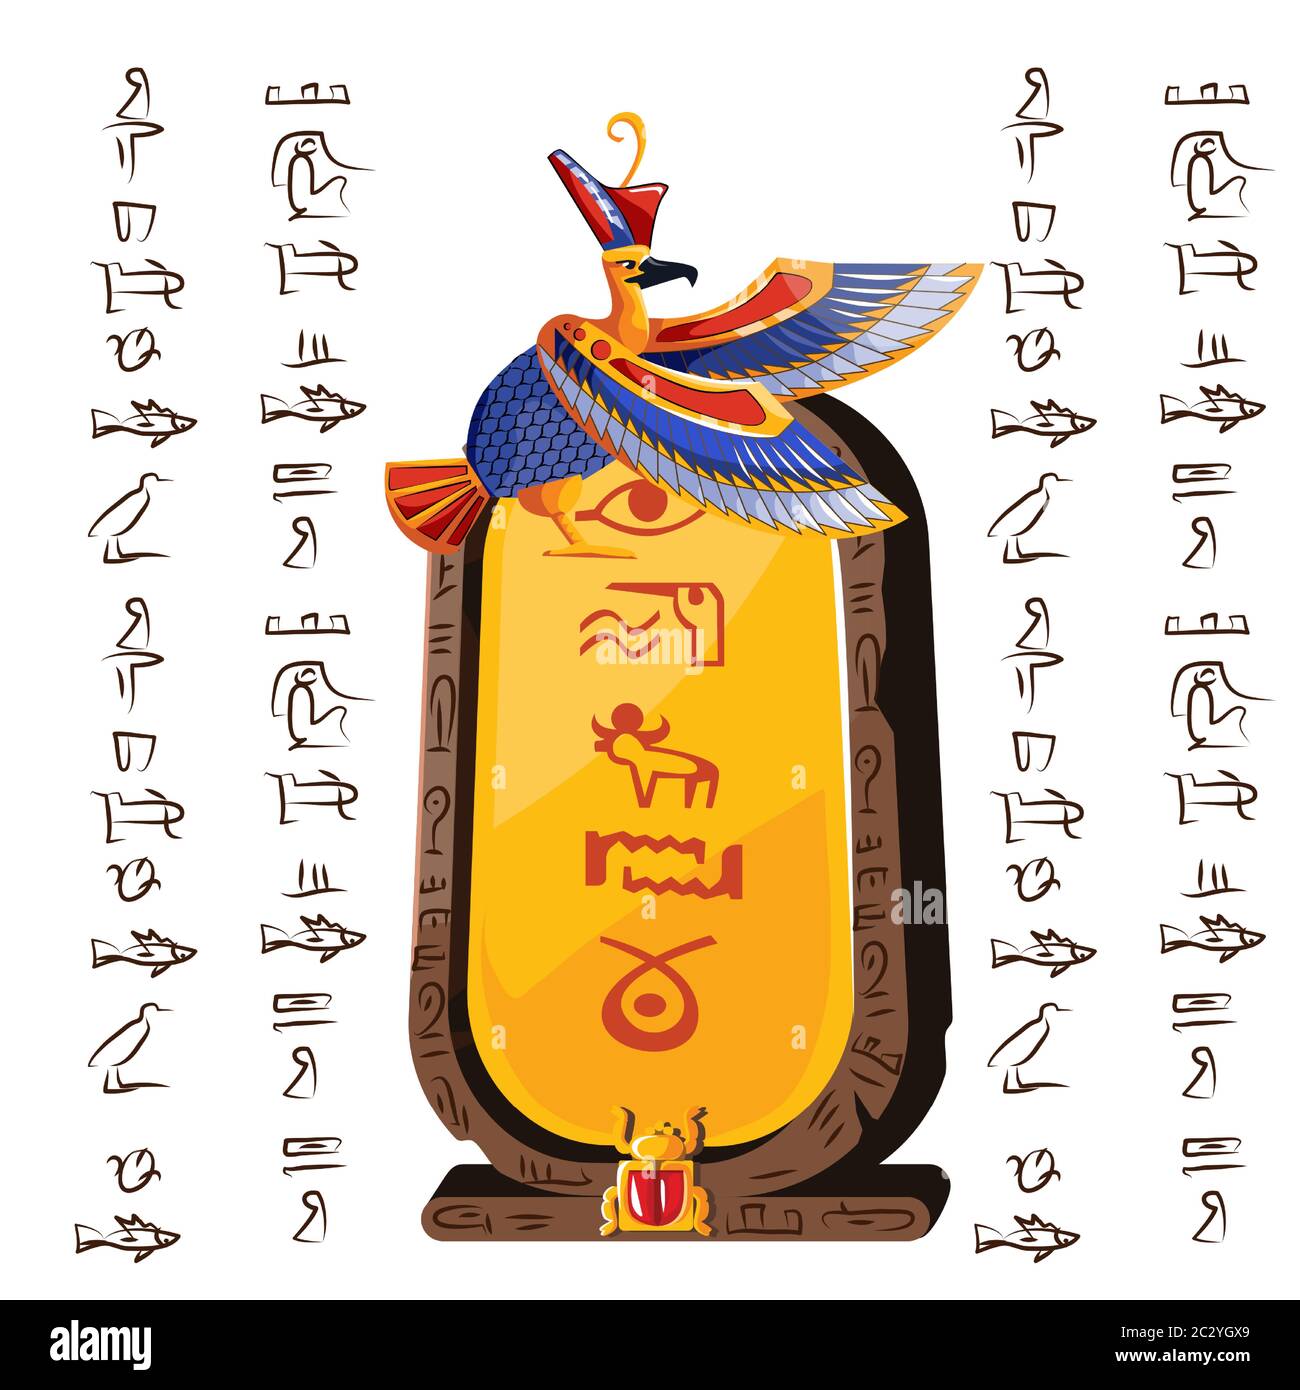 Stone board or clay tablet, falcon and Egyptian hieroglyphs cartoons vector illustration Ancient object for storing information, graphical user interf Stock Vector